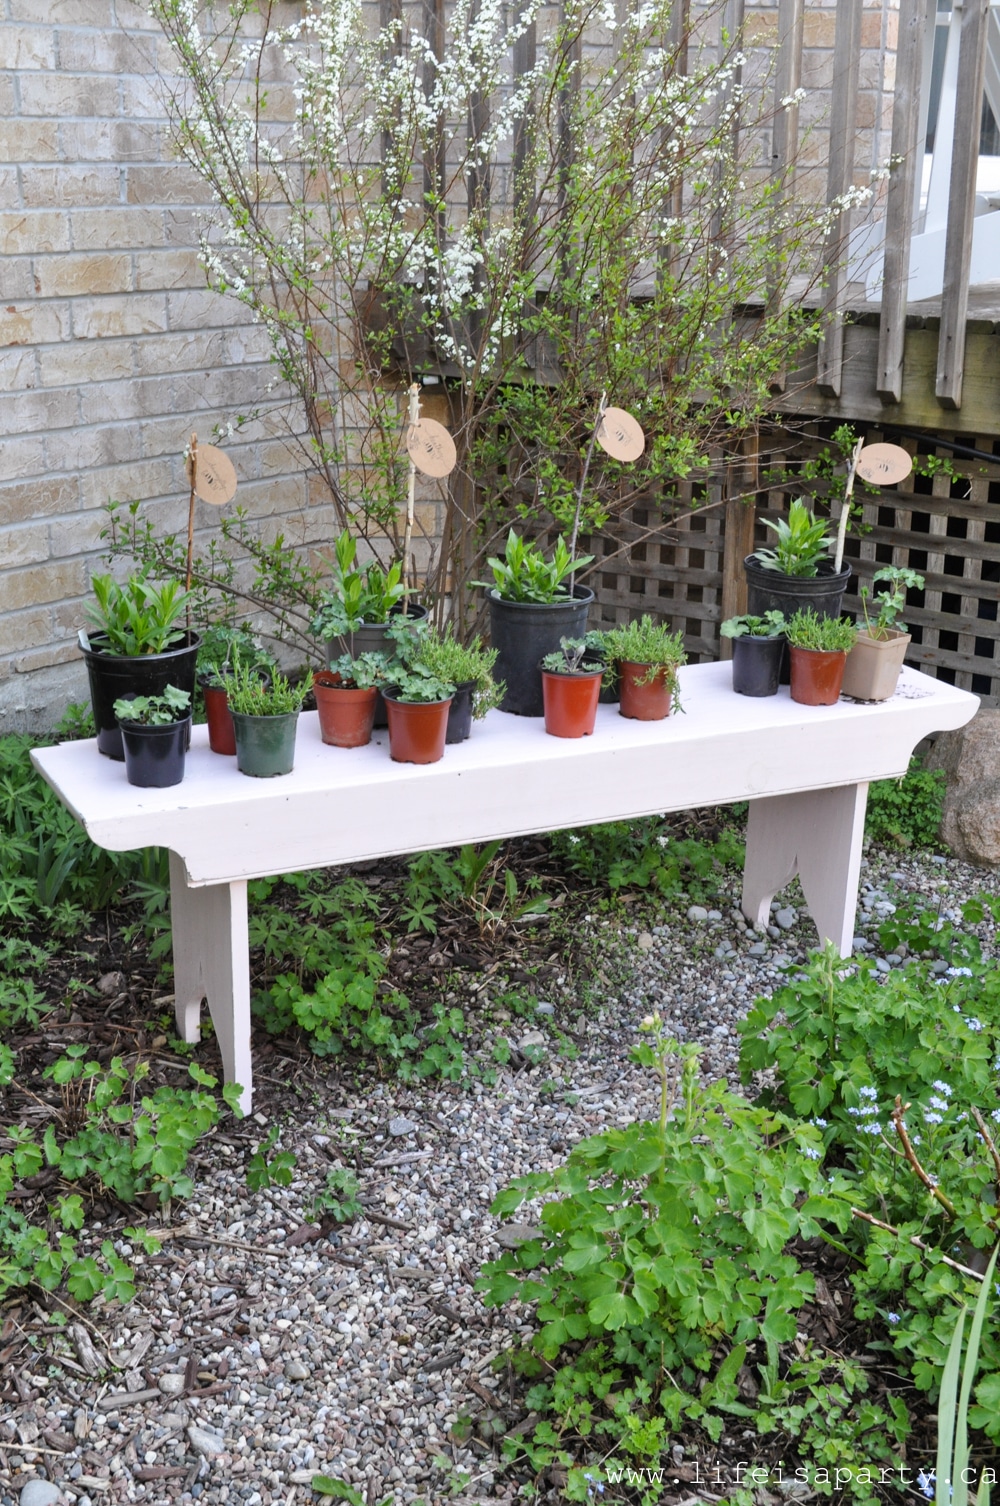 Tea Party and Plant Exchange: celebrate the beginning of gardening season with a plant exchange and tea party. Everyone brings a plant for everyone else from their garden, followed by a tea party together to celebrate the love of gardening.